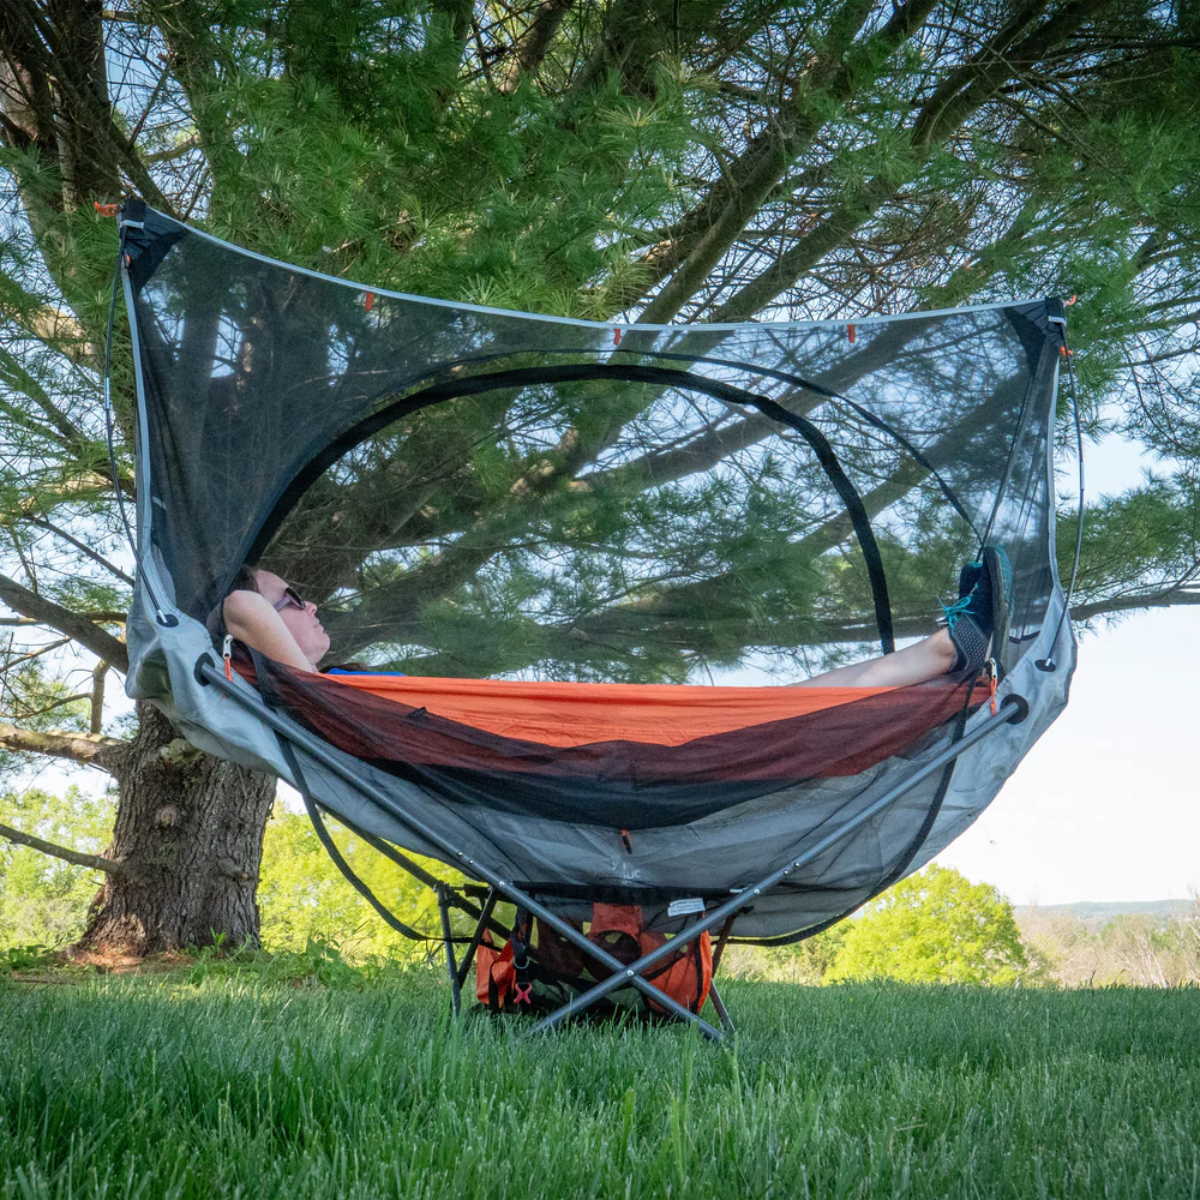 19. Experience Bliss Anywhere with a Portable Hammock - the Perfect Anniversary Gift for Him!